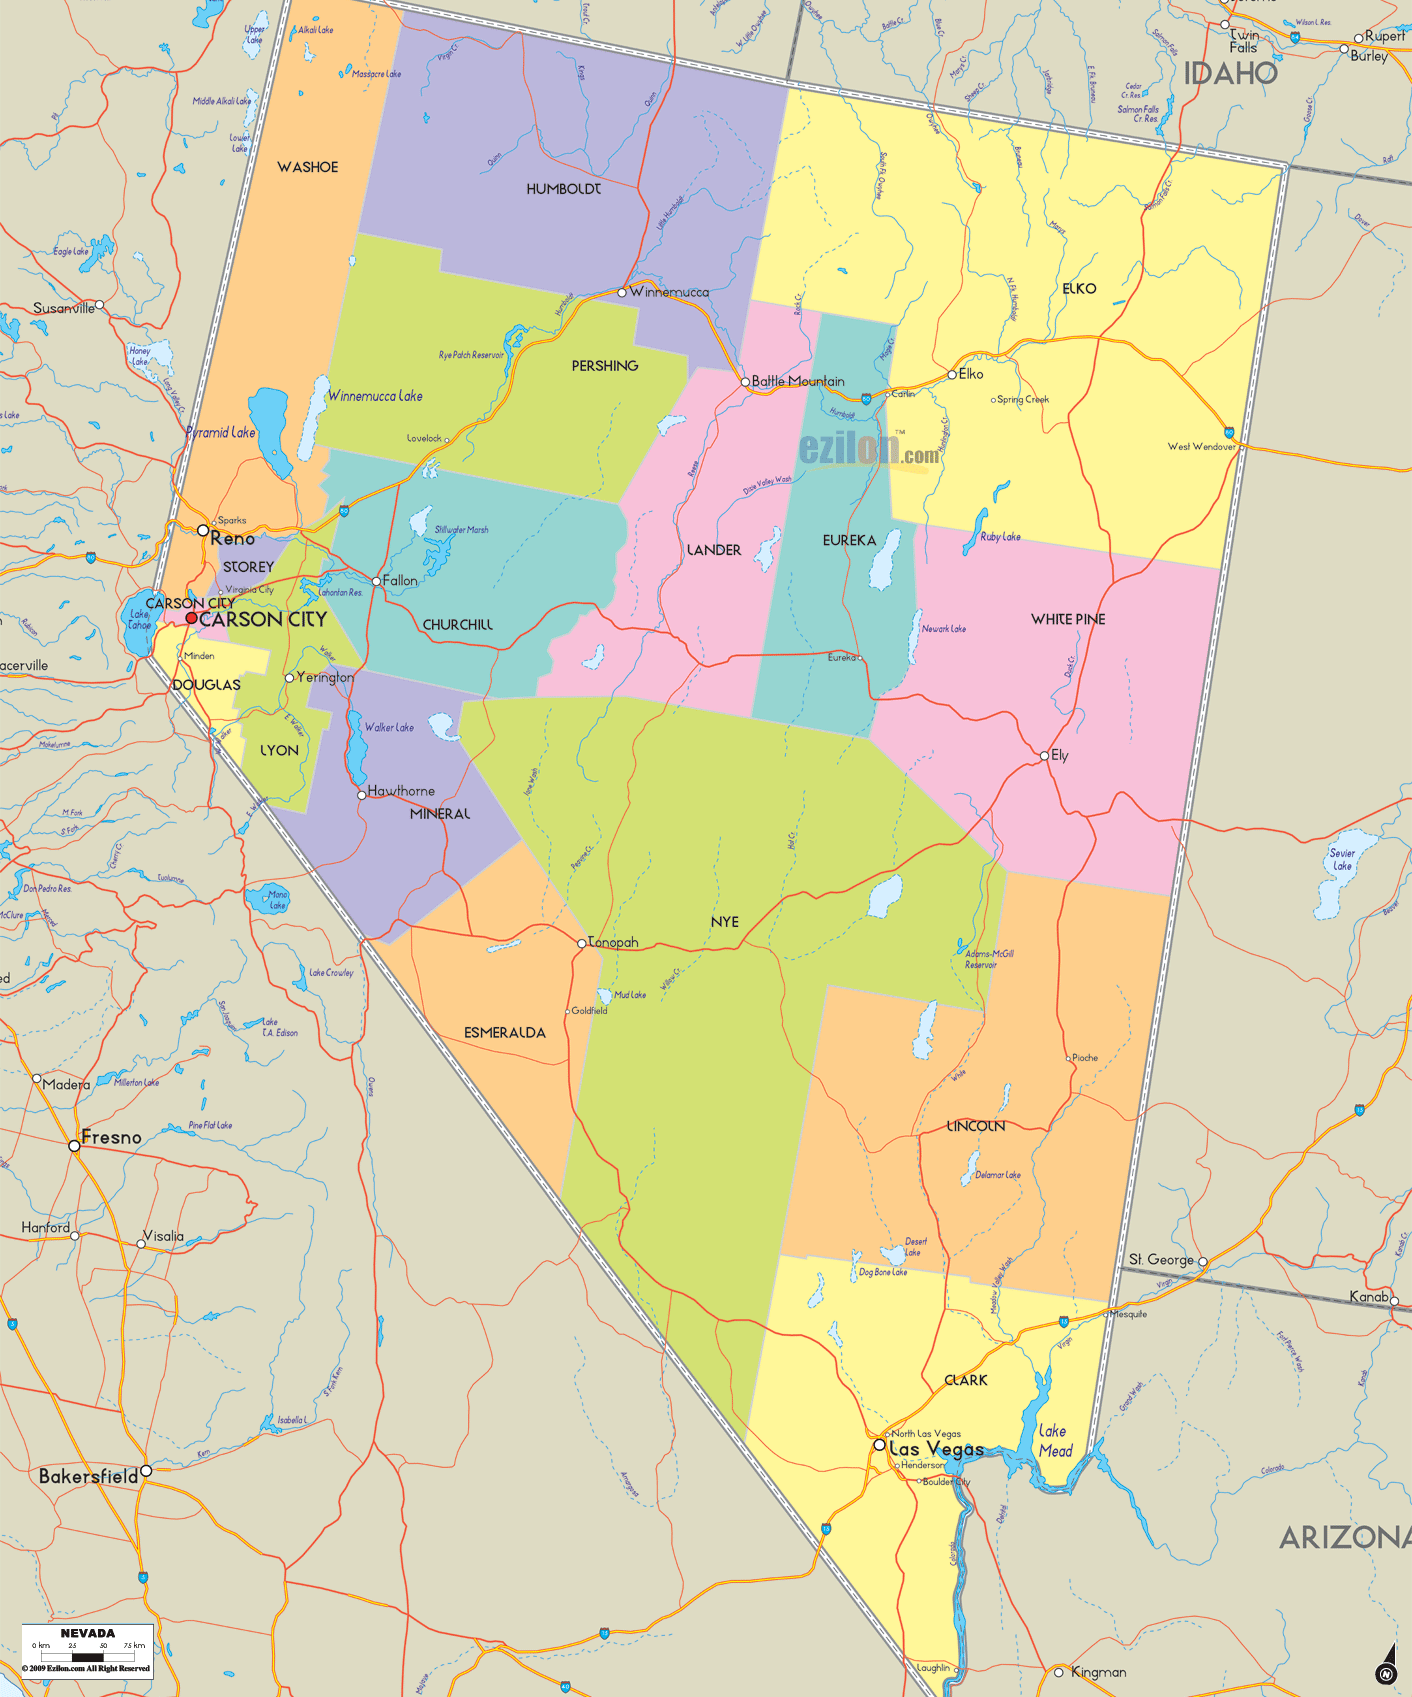 Detailed large map of Nevada State, USA showing cities, towns, county formations, roads highway, US highways and State routes.